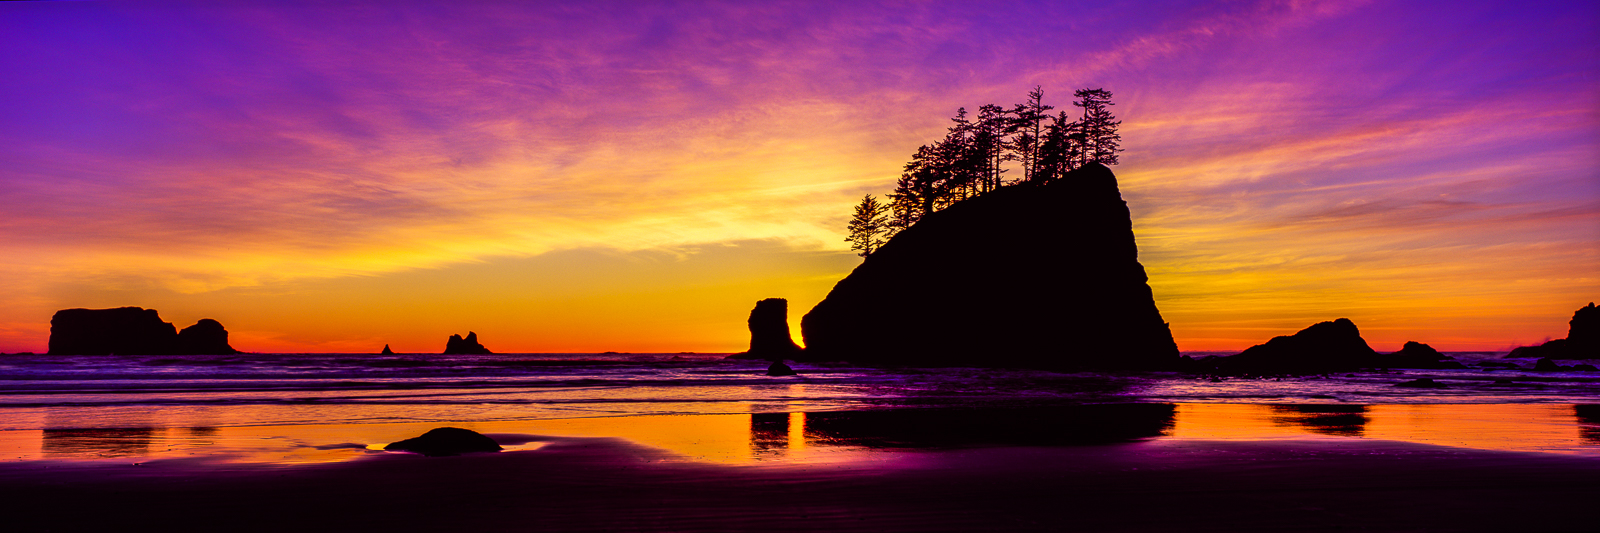 Scattered sea stacks rise like towers and the sands light up with the sky along the Washington coastline.